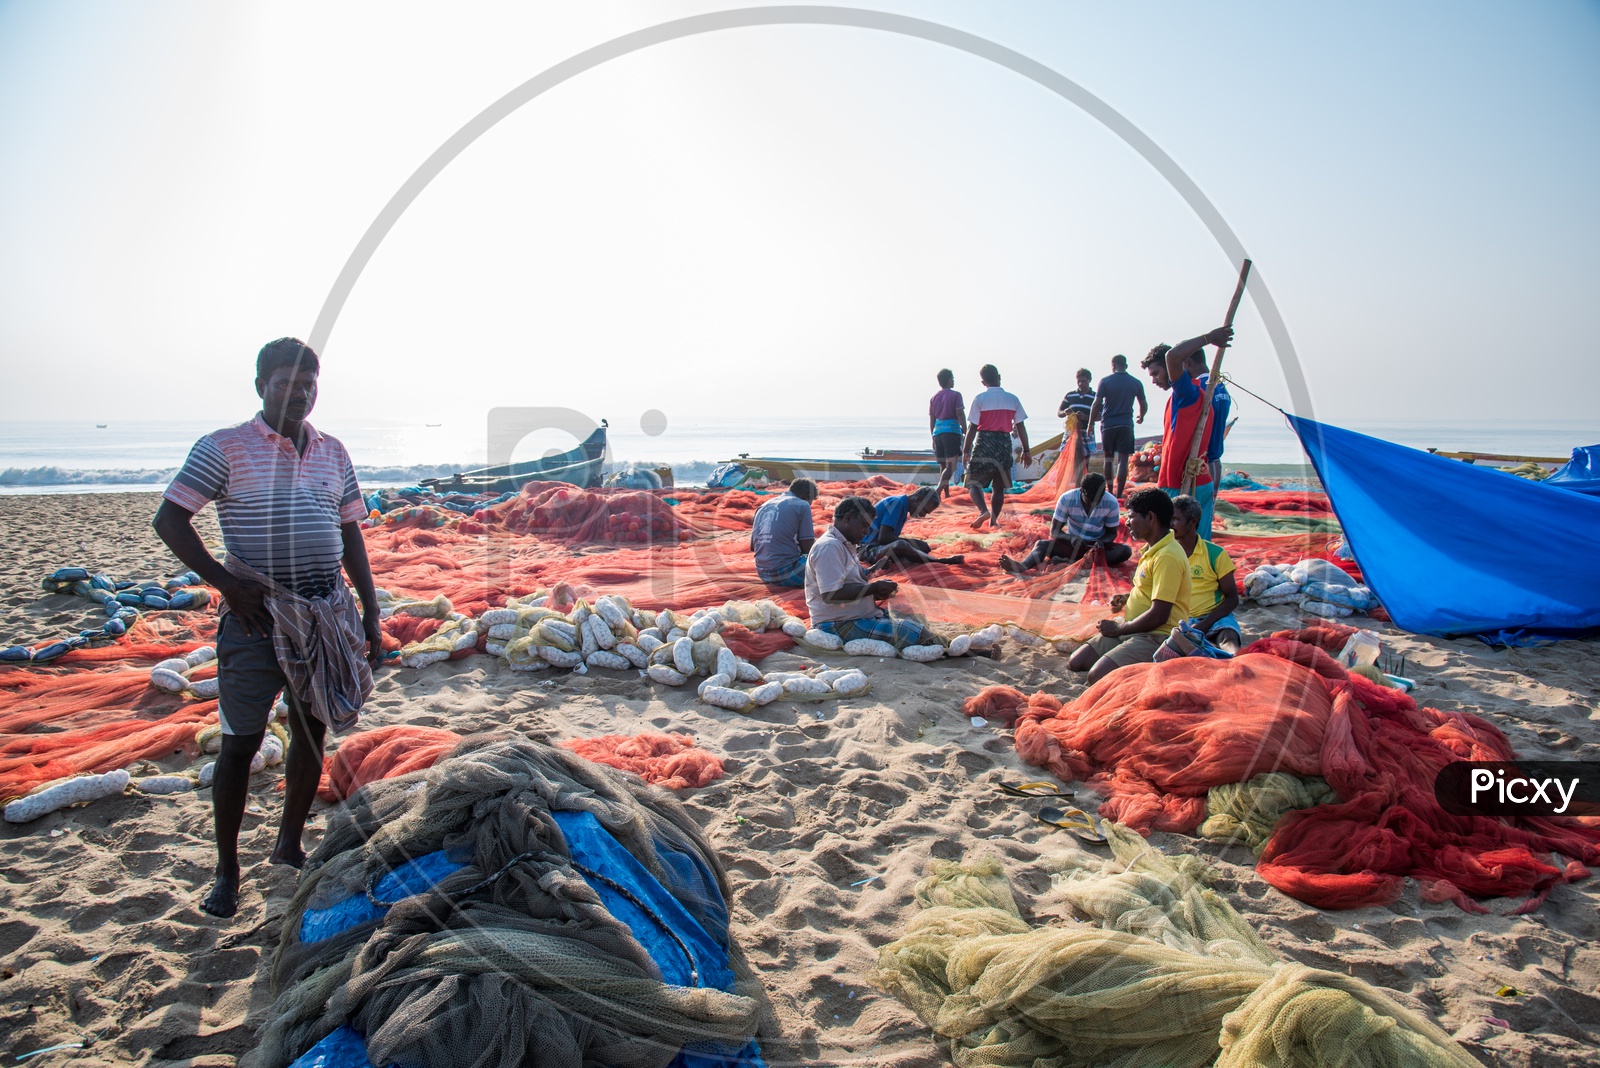 Fishermen Sewing their fish nets after a fishing session